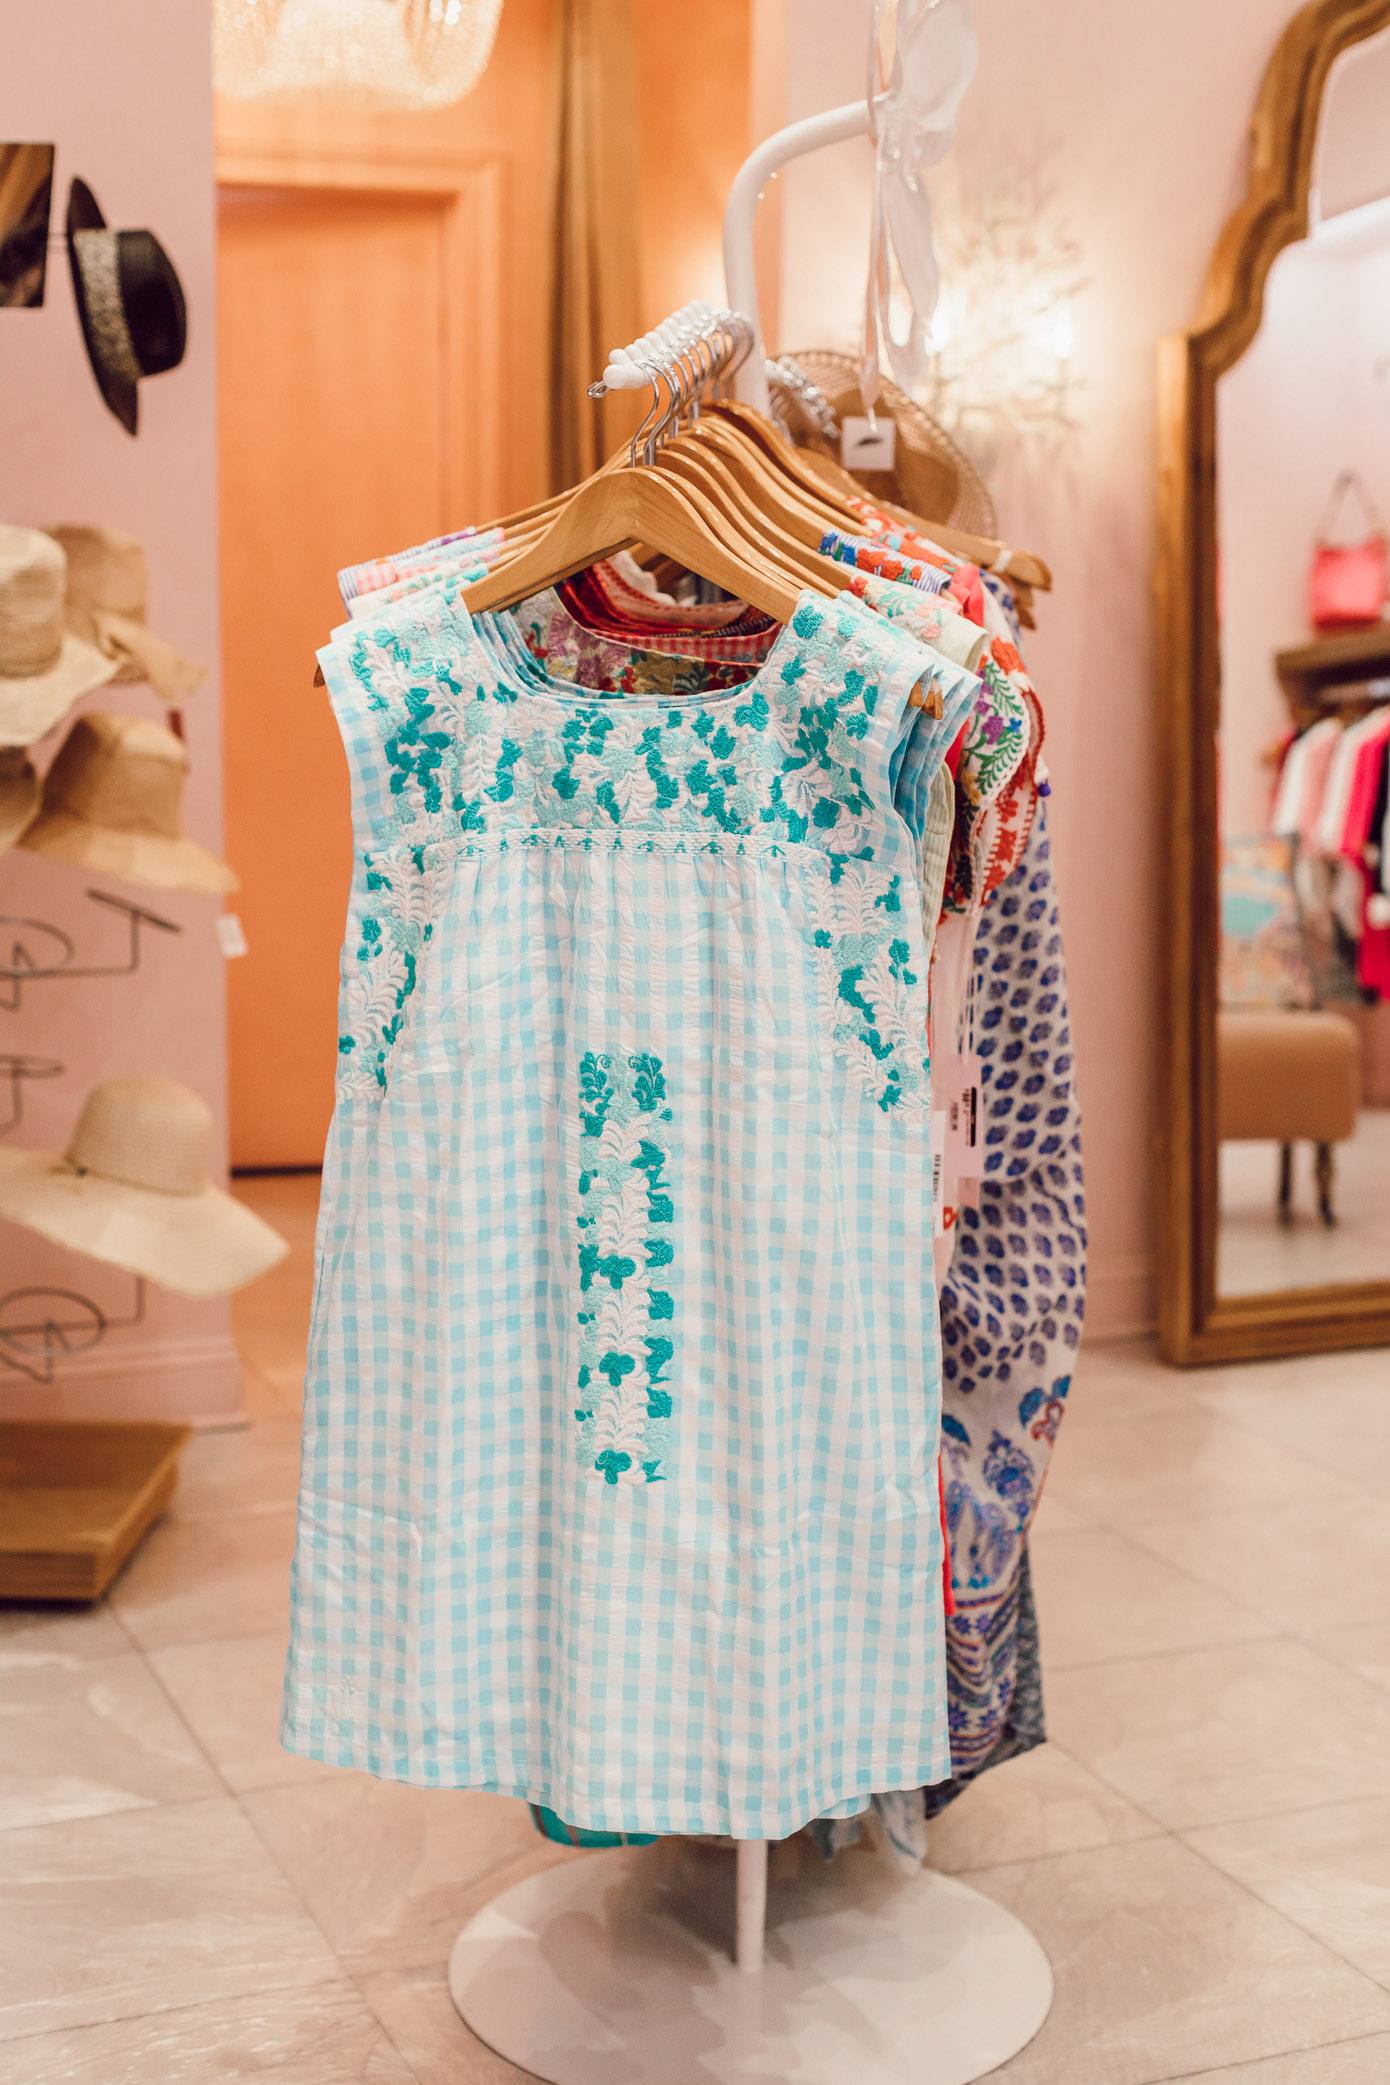 Where to Shop in Amelia Island | Pearl | Louella Reese